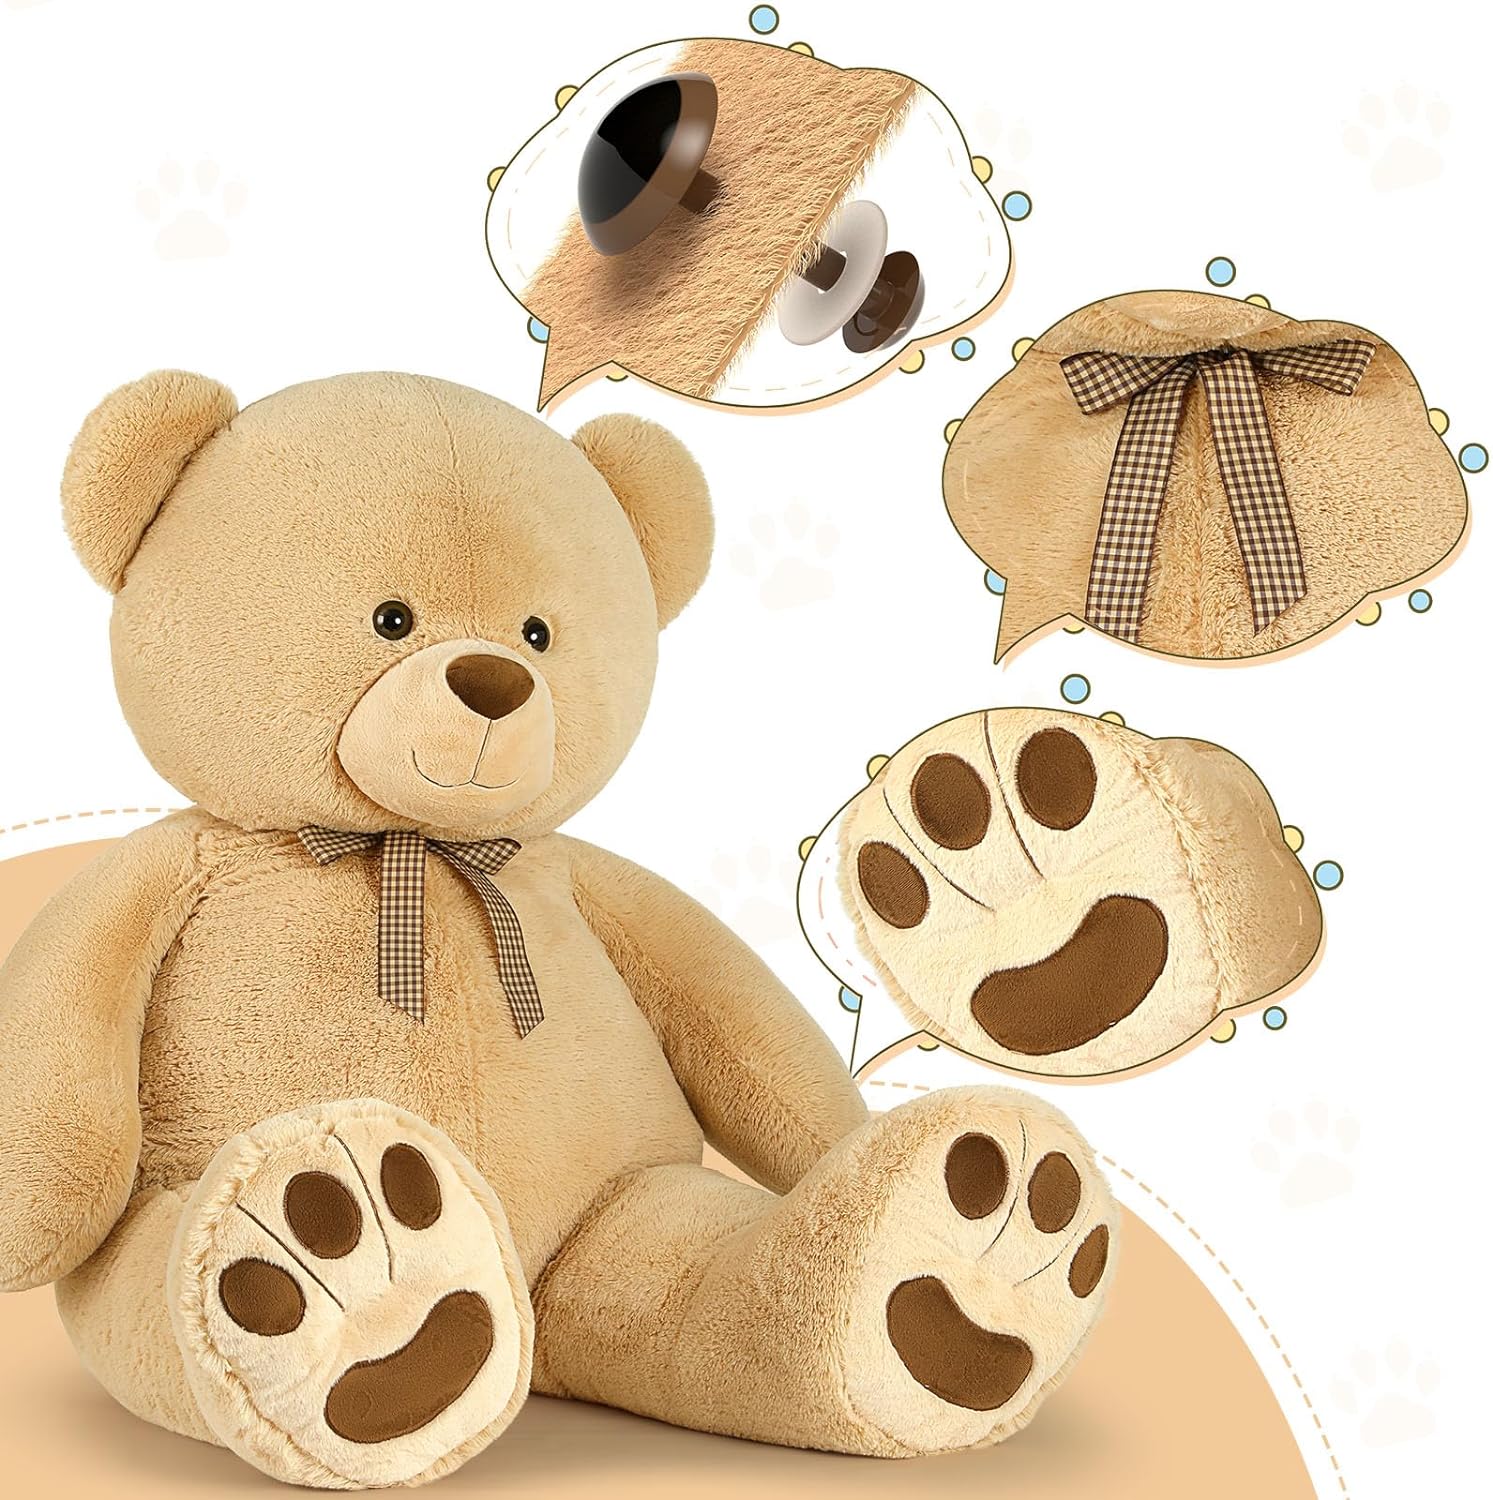 Giant Teddy Bear Plush Toy, Pink/Light Brown/White, 43/55 Inches